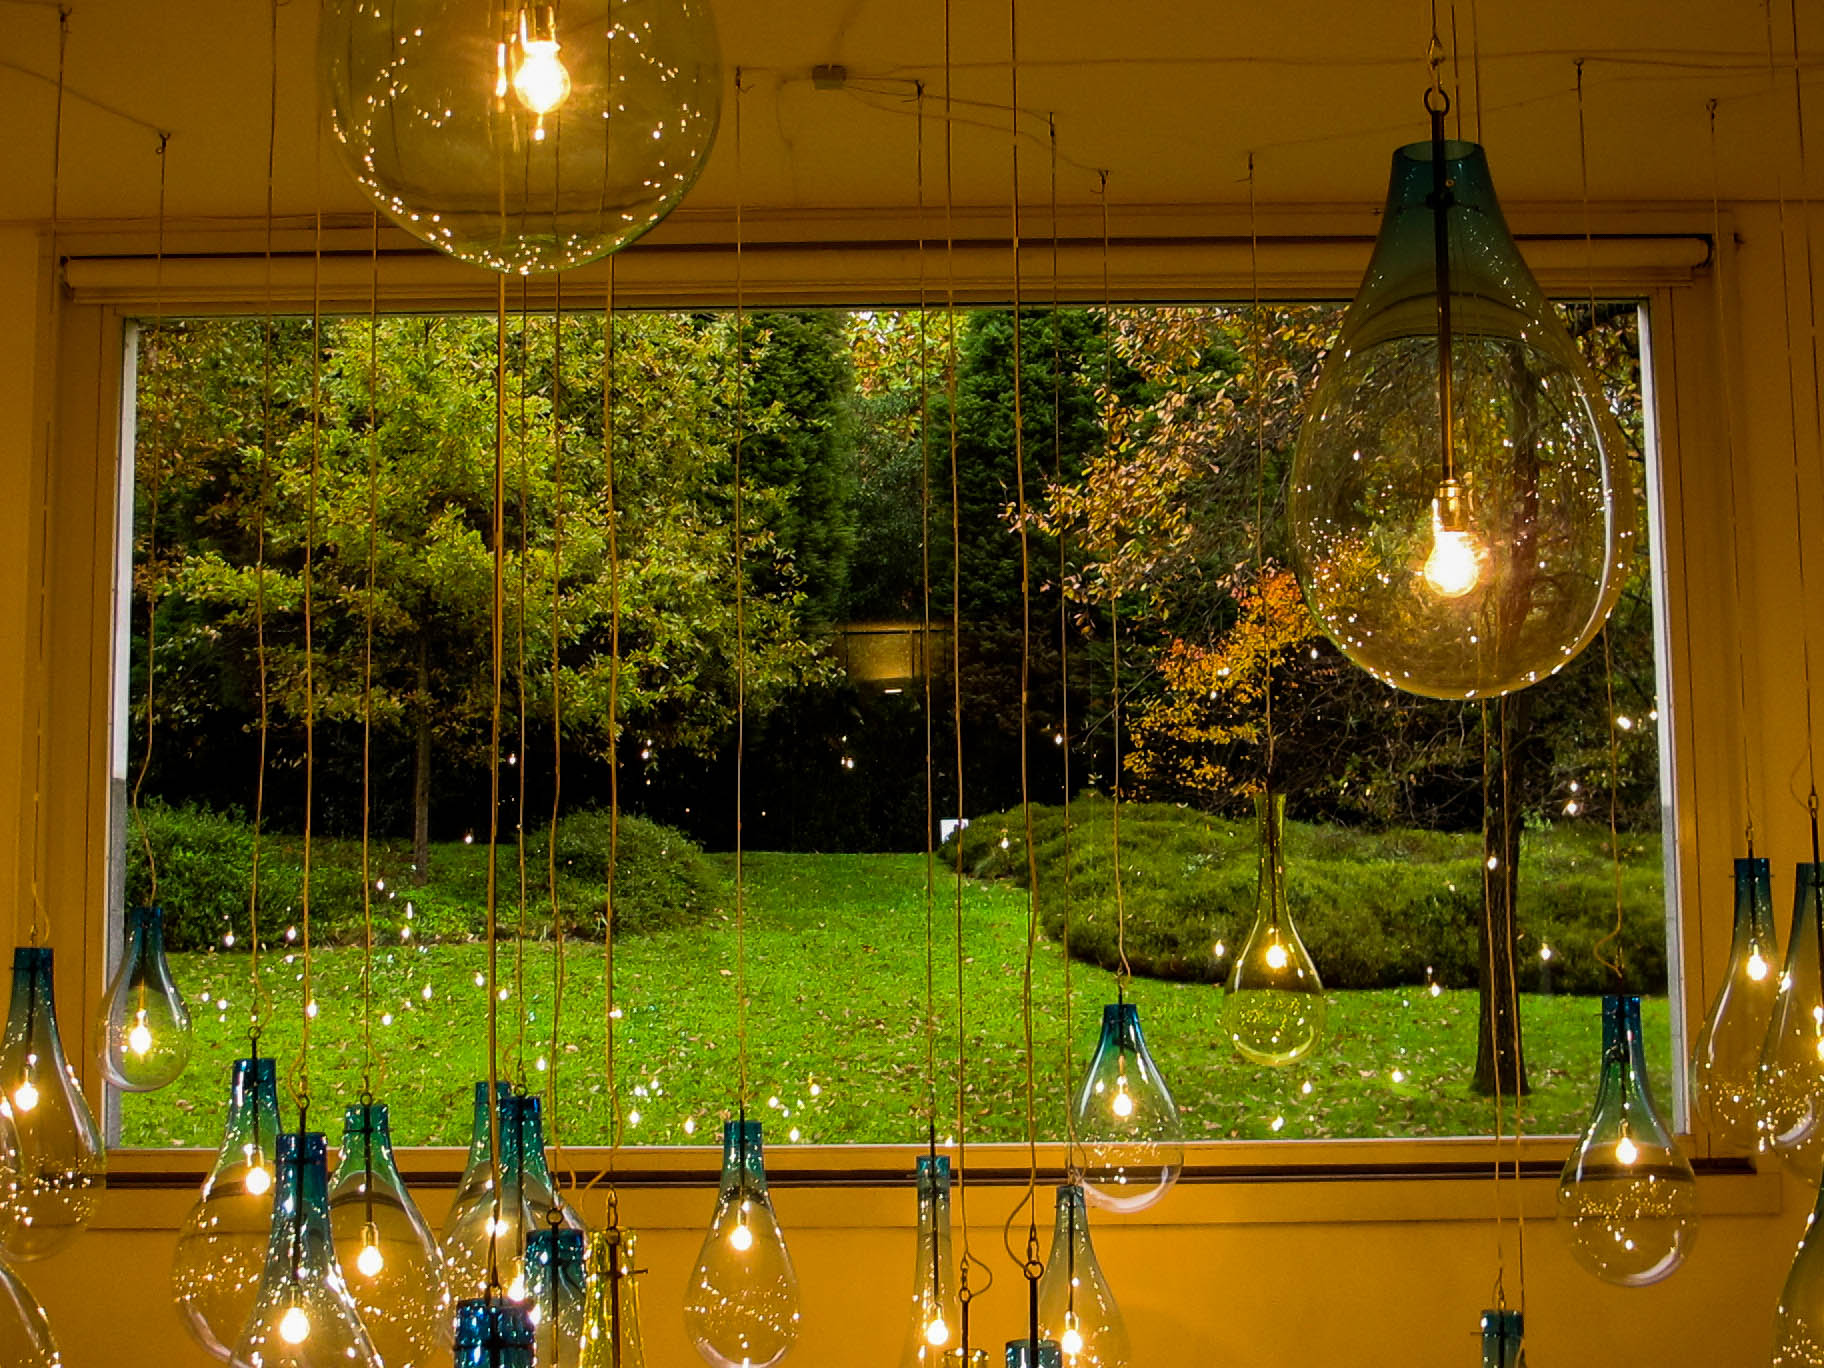 Different size light bulbs hanging in front of a generous window that shows the green park